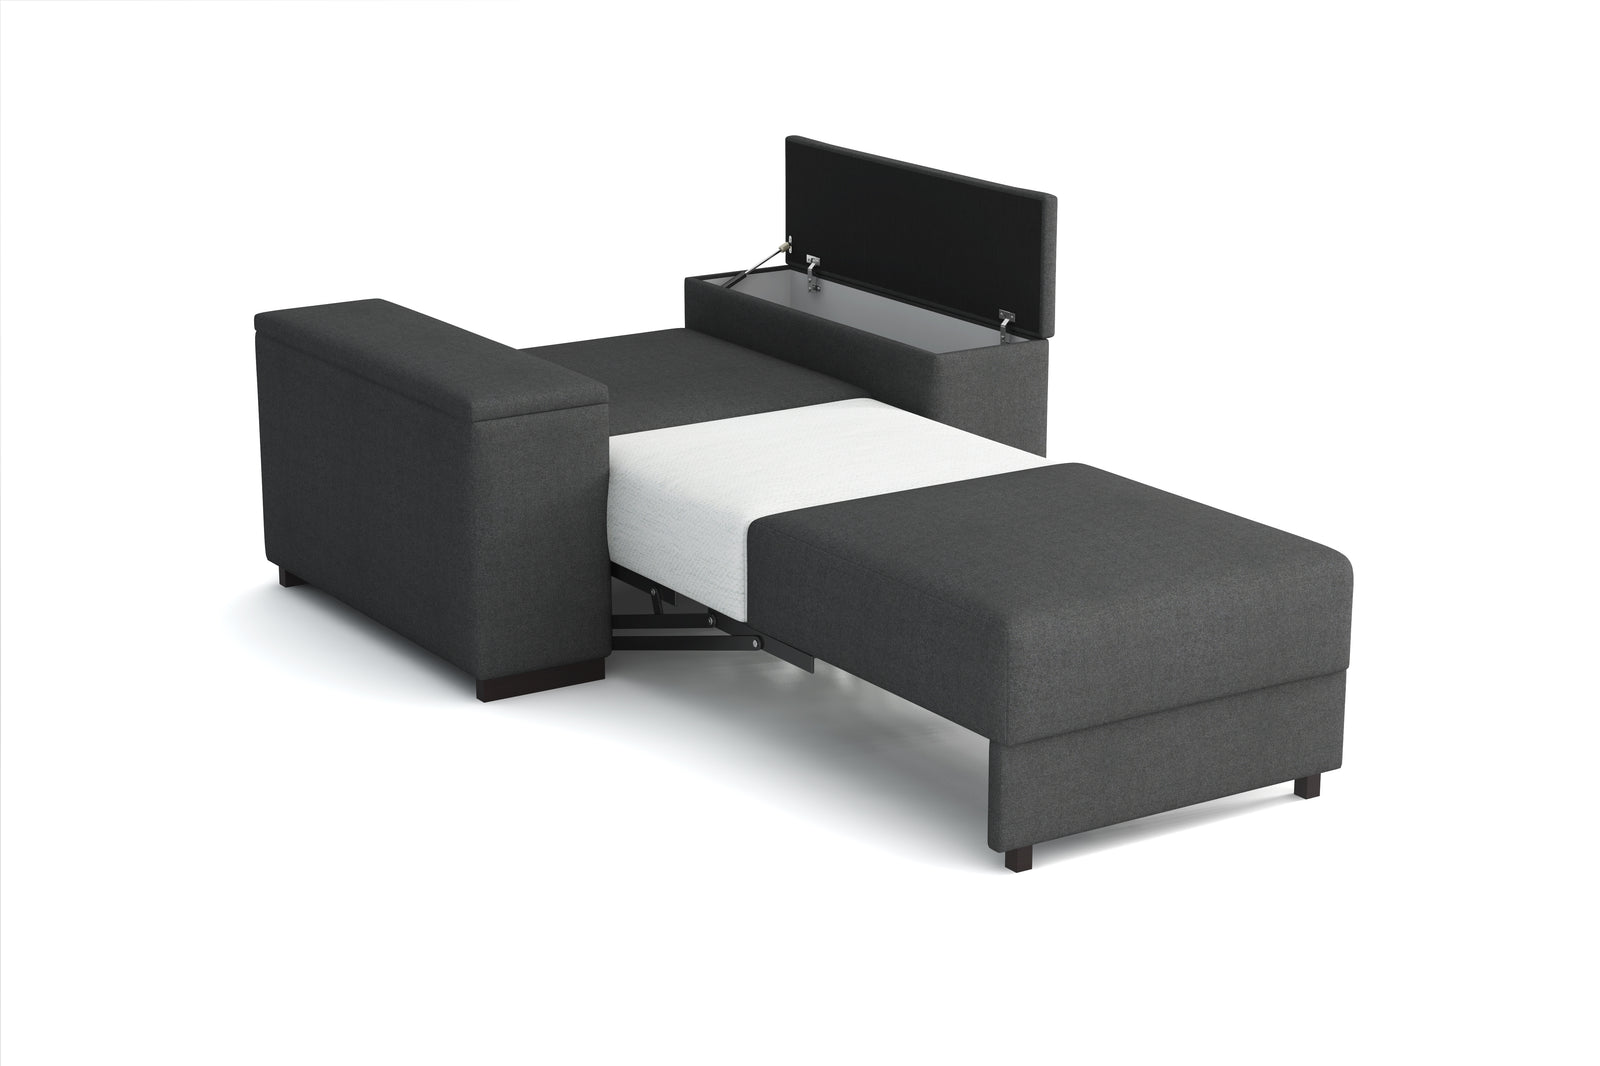 Armchair Beds - The Chair That Converts To A Single Bed - SofaBedExpert